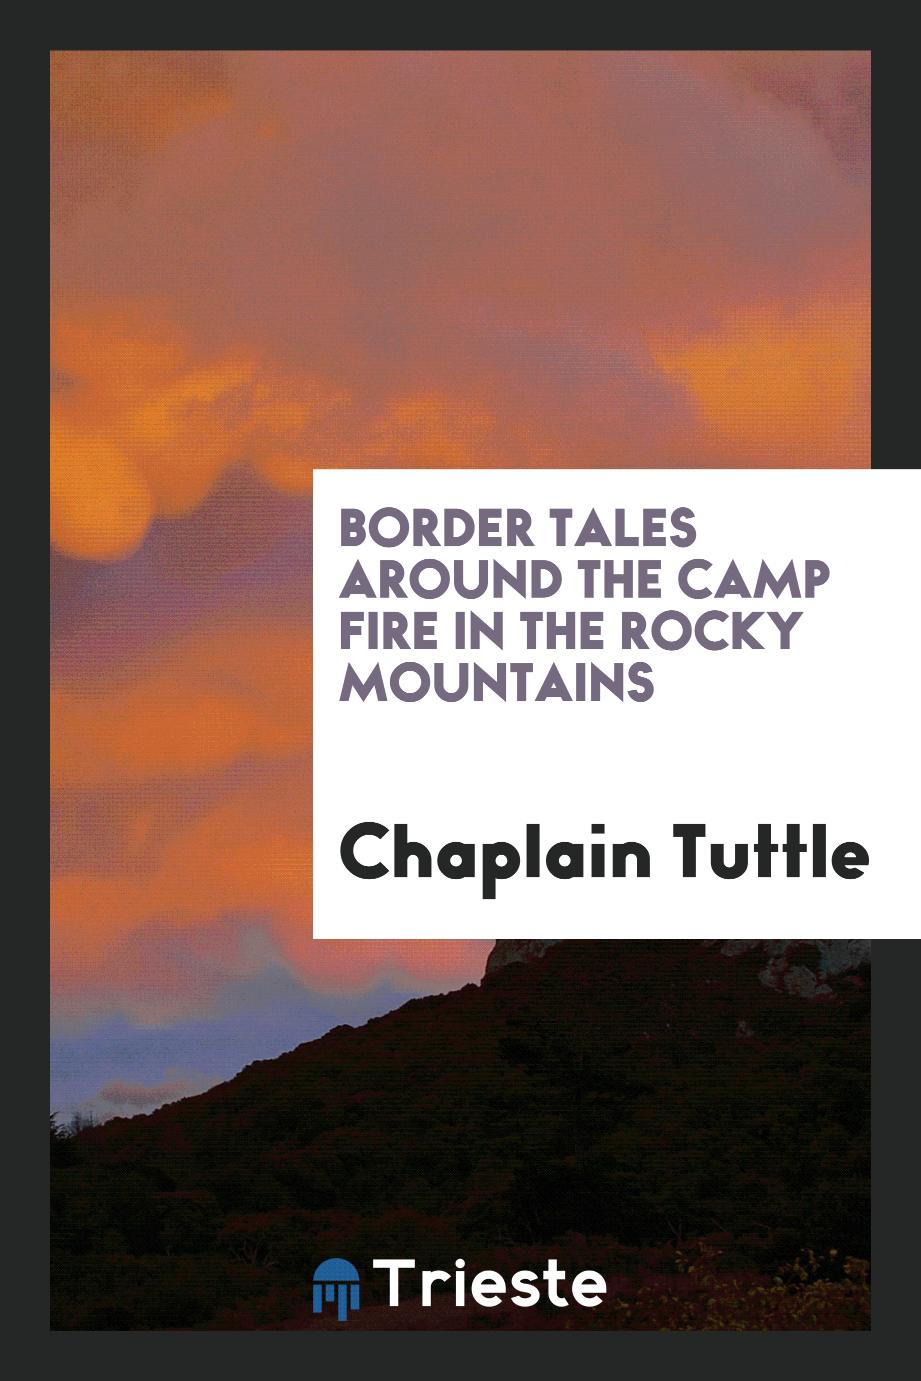 Border tales around the camp fire in the Rocky Mountains